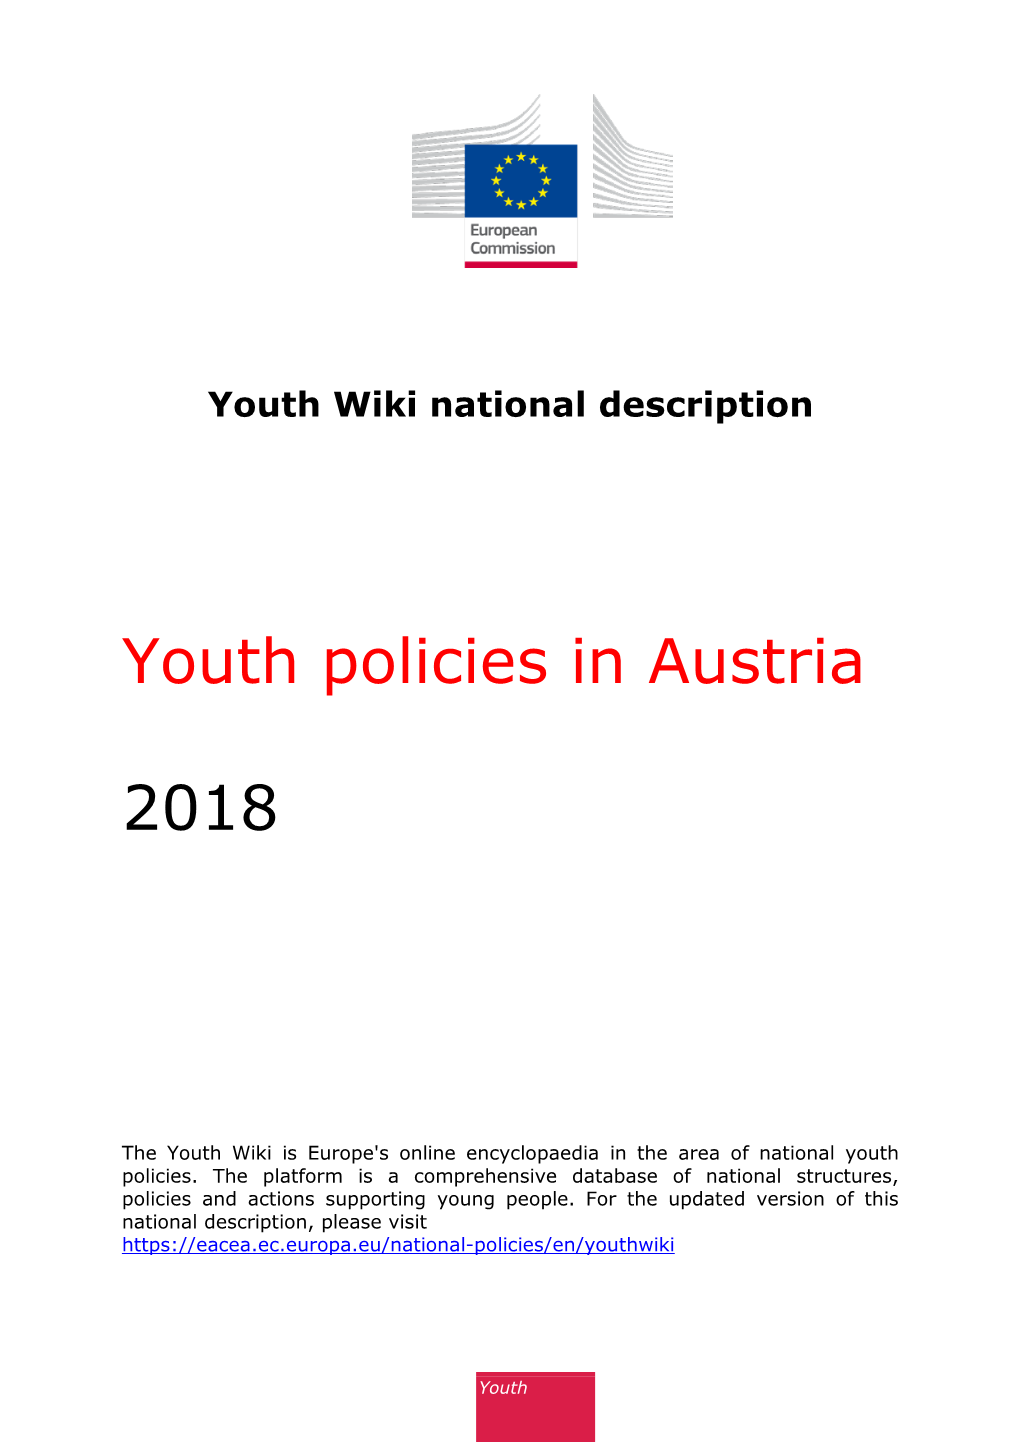 Youth Policies in Austria